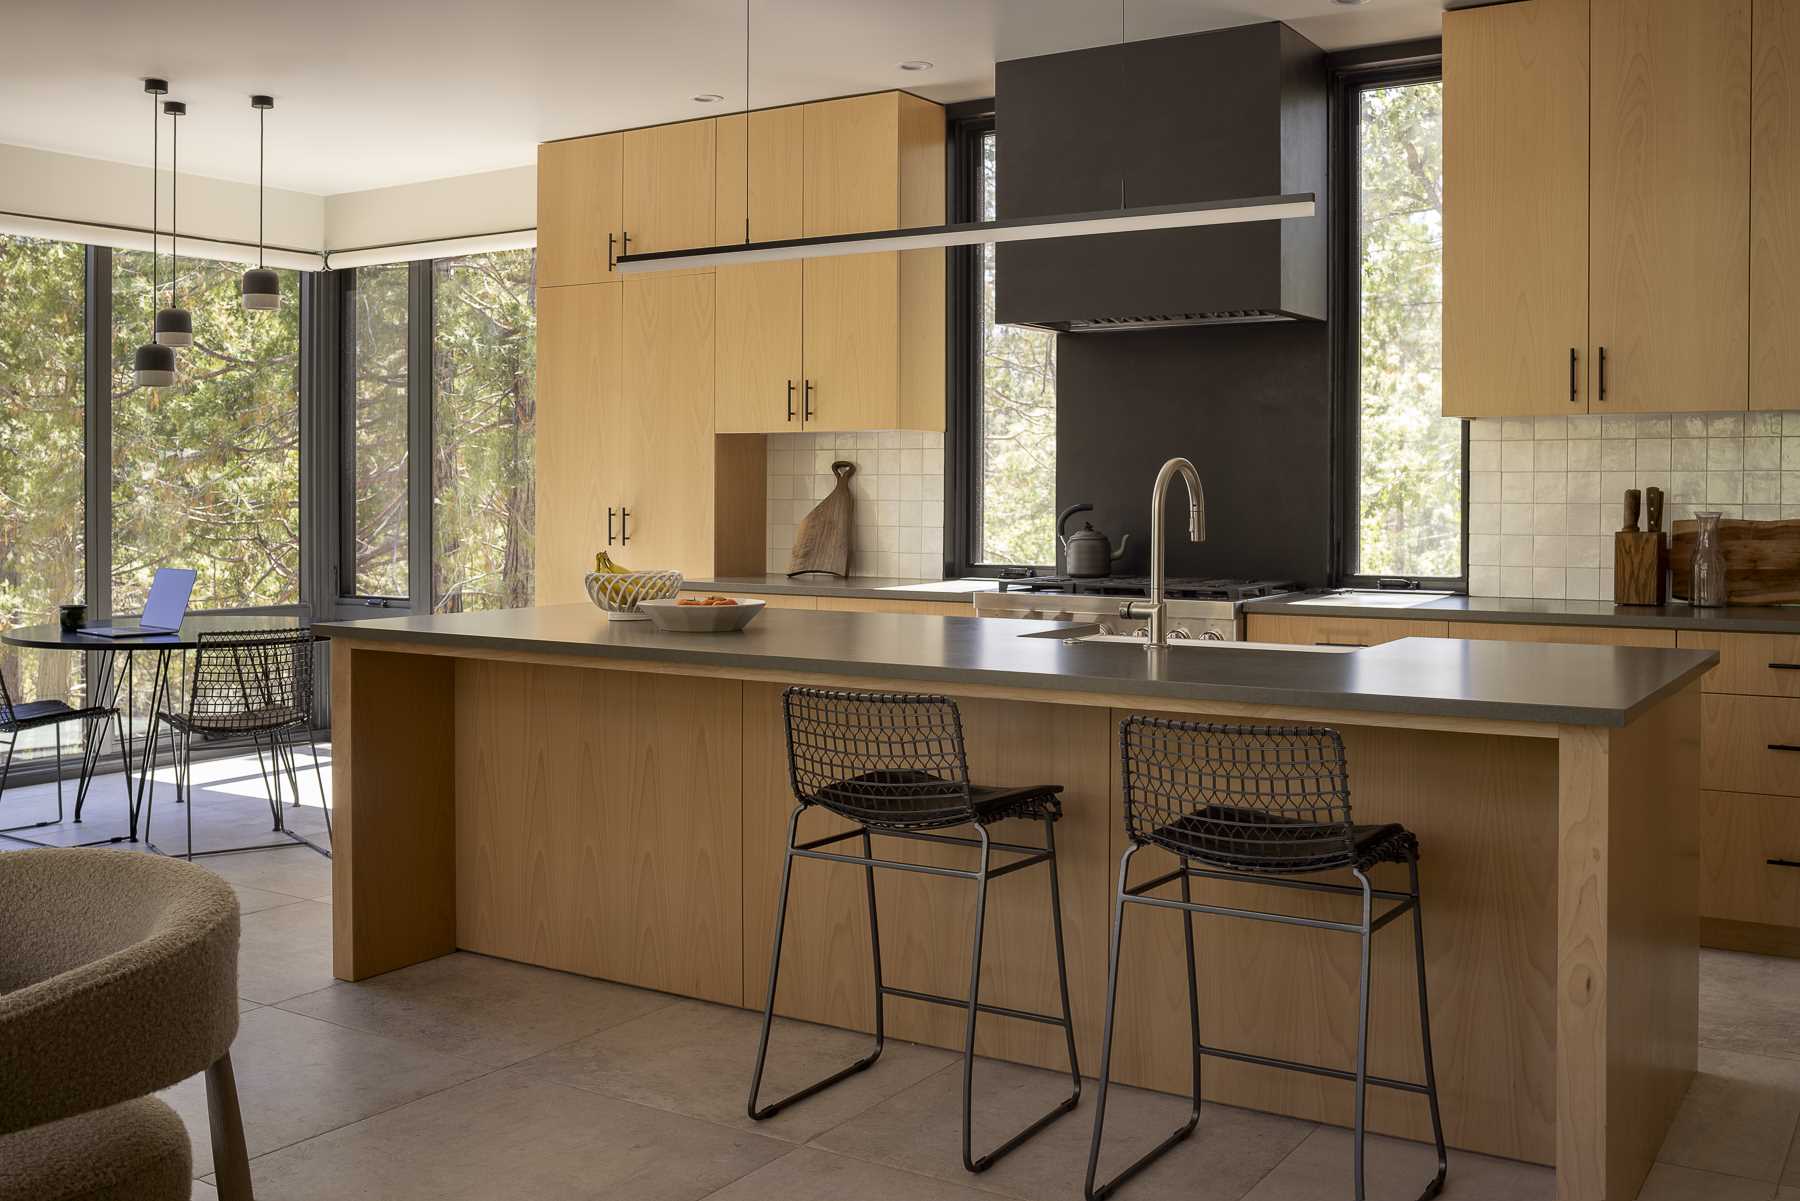 A small dining area by the windows shares the open floor plan with the kitchen, which s،wcases Beech Veneer cabinets and grey quartz countertops.